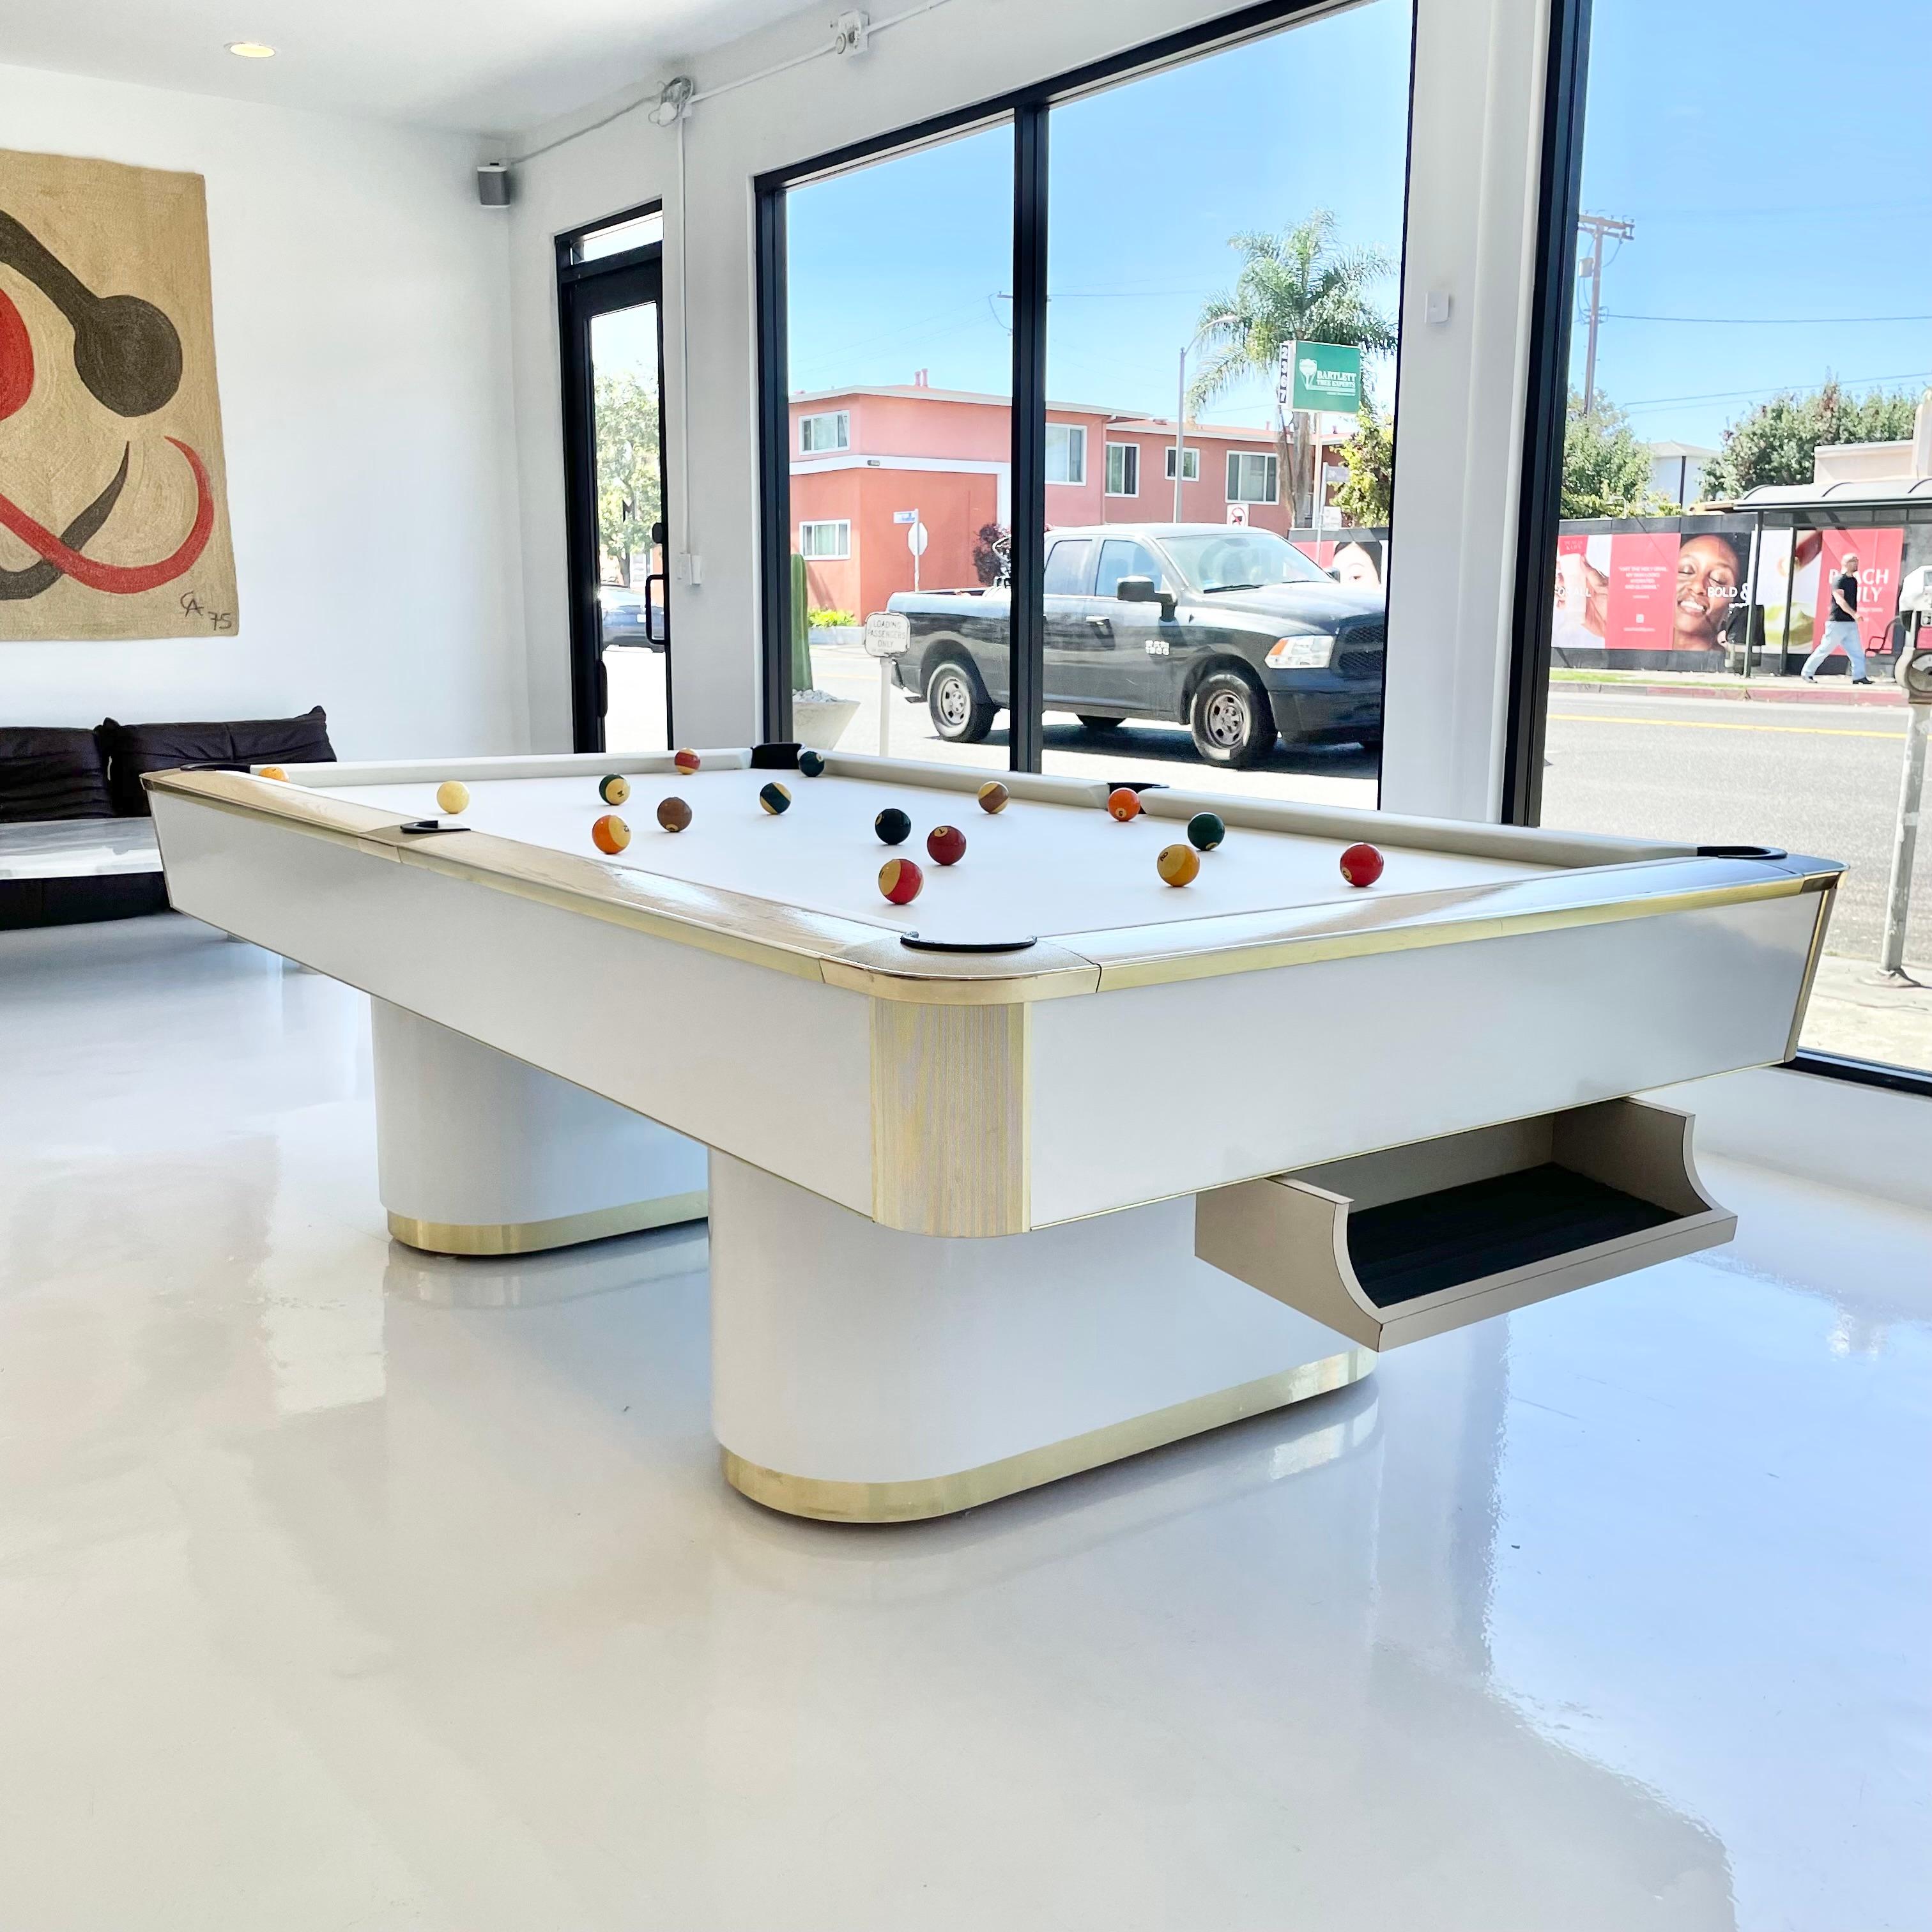 Brass and Formica Murrey Pool Table, 1980s California 3